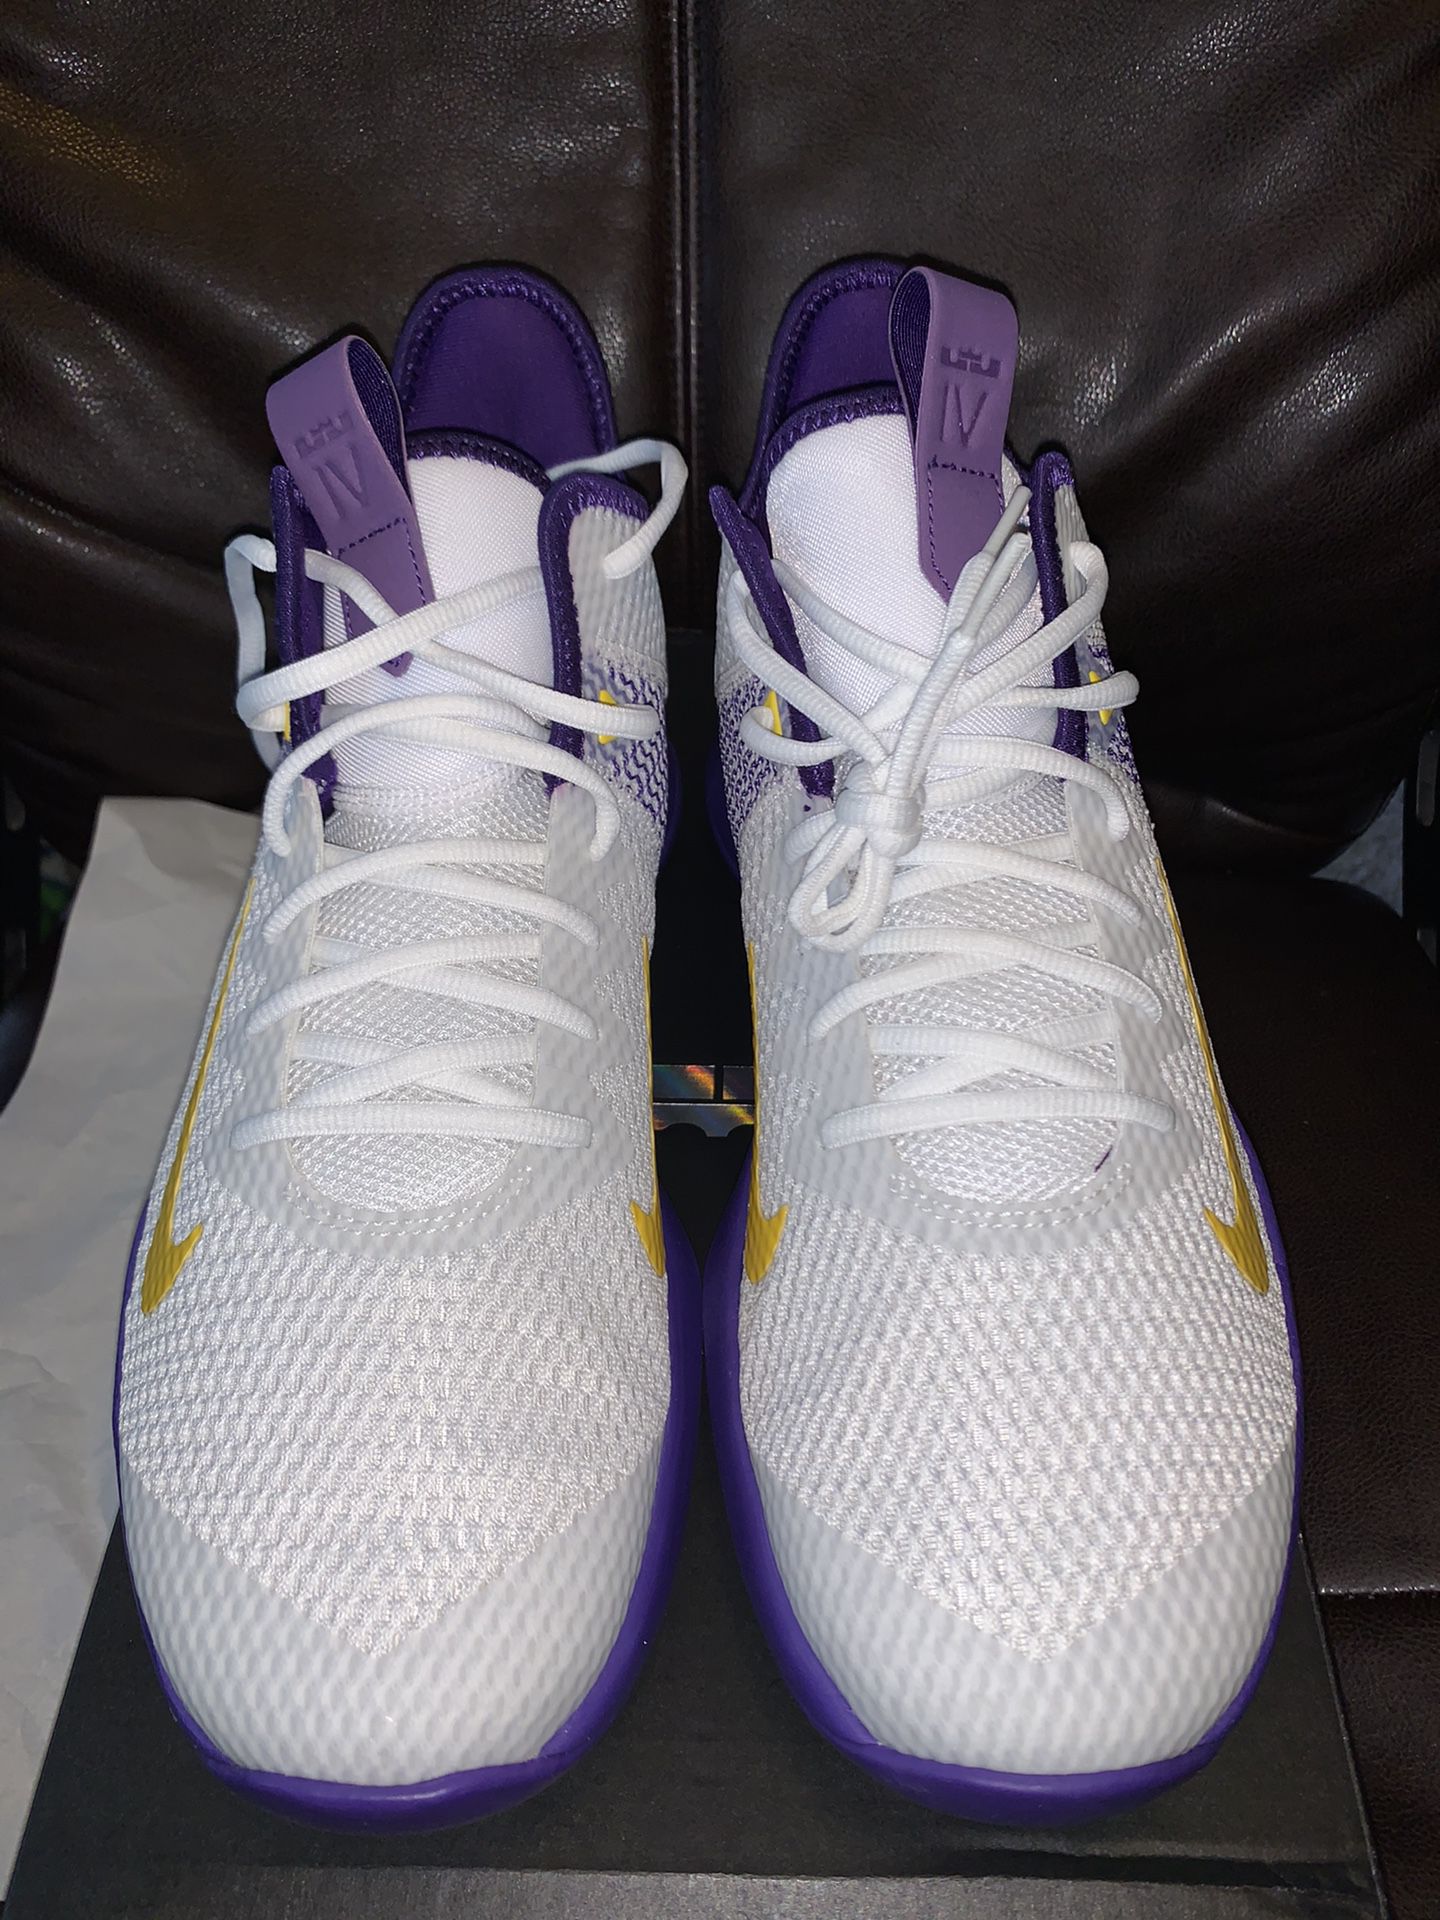 Nike Lebron Witness 5 White Purple Lakers Gold Basketball Shoes CQ9380-102  Men's Sz 11 for Sale in Newport Beach, CA - OfferUp